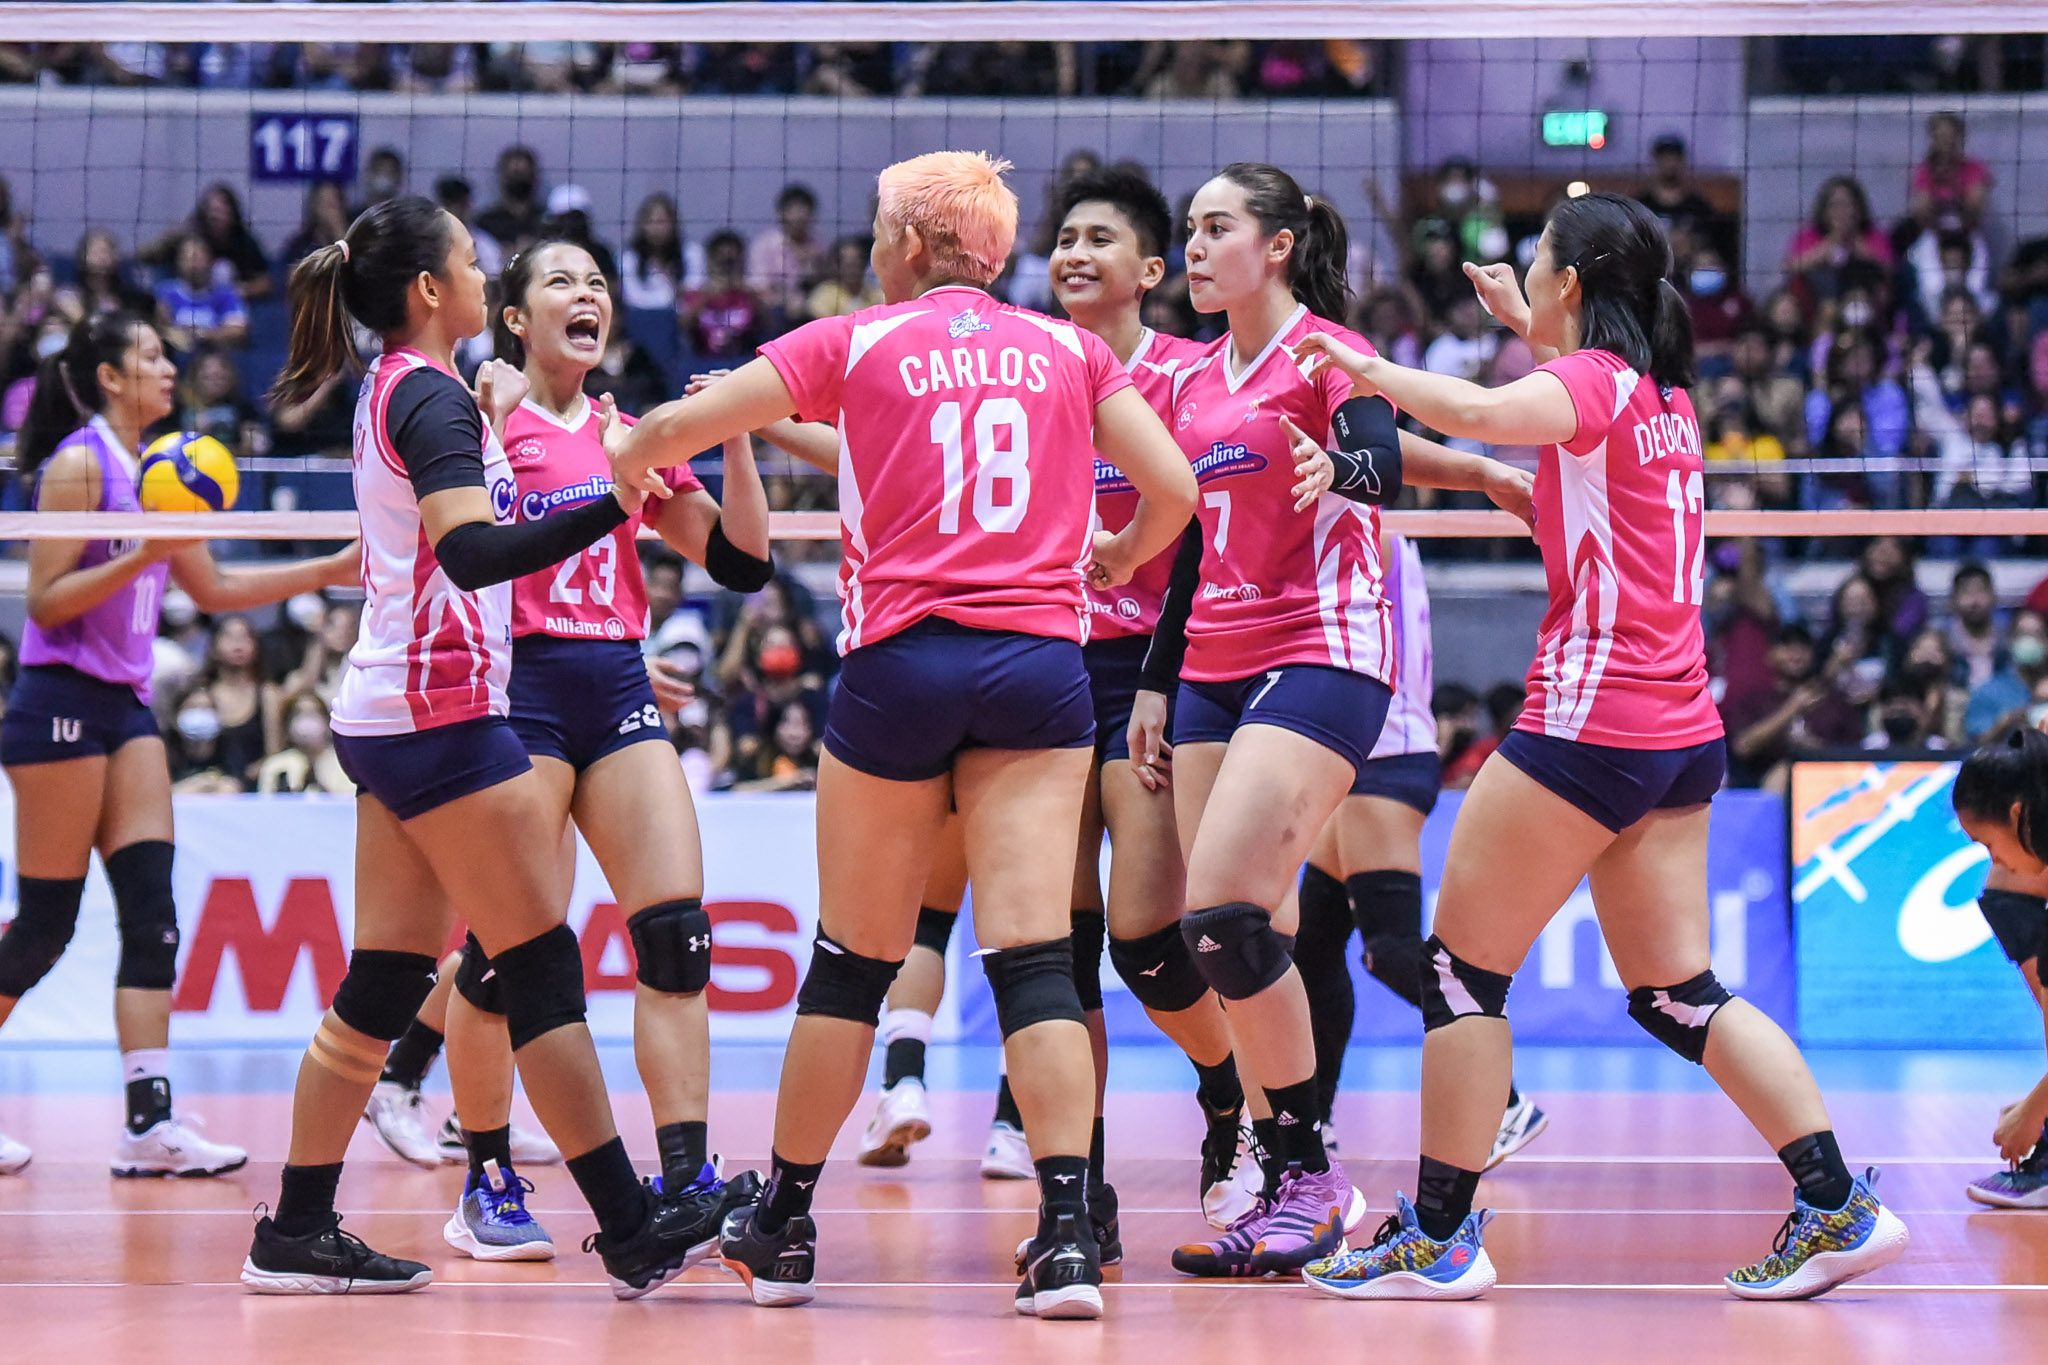 Creamline toys around Choco Mucho in lopsided sweep, goes up 8-0 in matchups